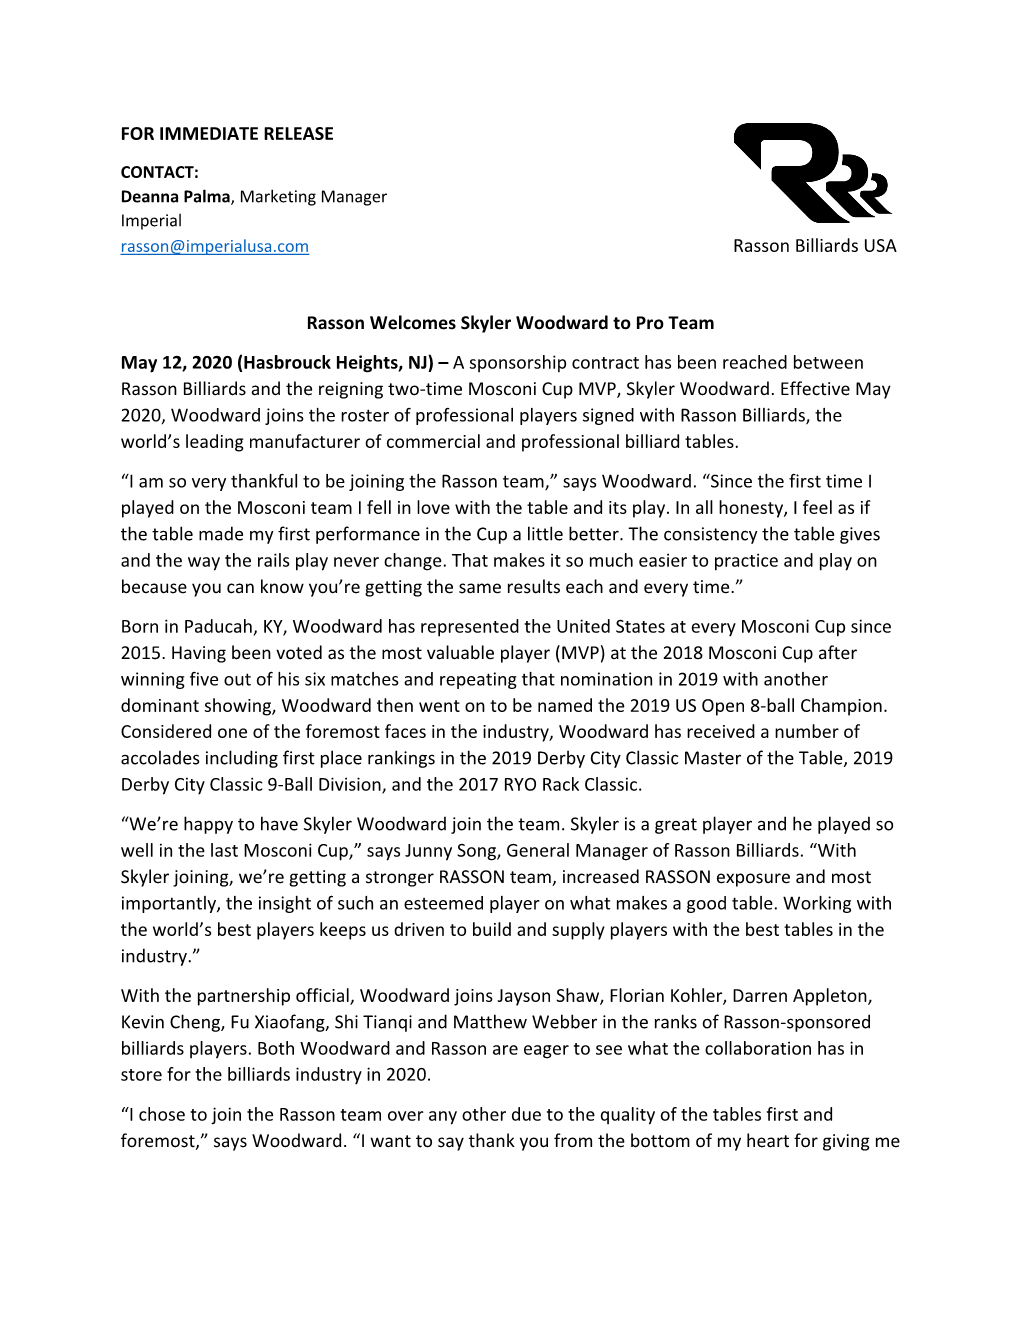 FOR IMMEDIATE RELEASE Rasson Billiards USA Rasson Welcomes Skyler Woodward to Pro Team May 12, 2020 (Hasbrouck Heights, NJ) –